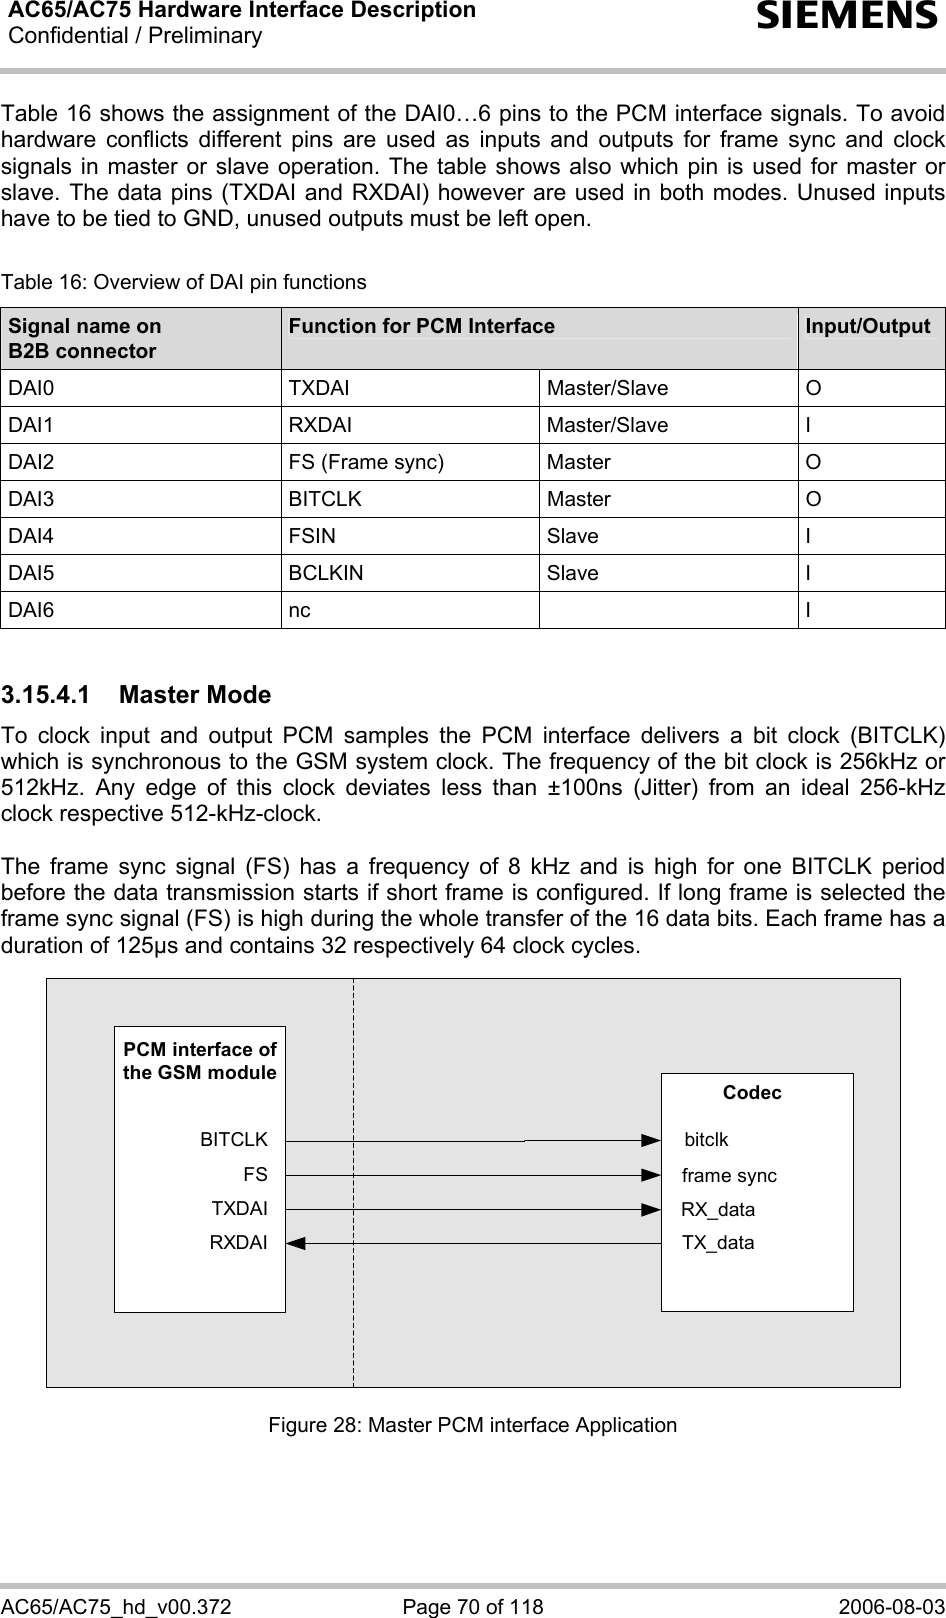 AC65/AC75 Hardware Interface Description Confidential / Preliminary   s AC65/AC75_hd_v00.372  Page 70 of 118  2006-08-03 Table 16 shows the assignment of the DAI0…6 pins to the PCM interface signals. To avoid hardware conflicts different pins are used as inputs and outputs for frame sync and clock signals in master or slave operation. The table shows also which pin is used for master or slave. The data pins (TXDAI and RXDAI) however are used in both modes. Unused inputs have to be tied to GND, unused outputs must be left open.  Table 16: Overview of DAI pin functions Signal name on  B2B connector Function for PCM Interface  Input/Output DAI0 TXDAI Master/Slave O DAI1 RXDAI Master/Slave I DAI2  FS (Frame sync)  Master  O DAI3 BITCLK Master O DAI4 FSIN Slave I DAI5 BCLKIN Slave I DAI6 nc   I  3.15.4.1 Master Mode To clock input and output PCM samples the PCM interface delivers a bit clock (BITCLK) which is synchronous to the GSM system clock. The frequency of the bit clock is 256kHz or 512kHz. Any edge of this clock deviates less than ±100ns (Jitter) from an ideal 256-kHz clock respective 512-kHz-clock.   The frame sync signal (FS) has a frequency of 8 kHz and is high for one BITCLK period before the data transmission starts if short frame is configured. If long frame is selected the frame sync signal (FS) is high during the whole transfer of the 16 data bits. Each frame has a duration of 125µs and contains 32 respectively 64 clock cycles.  BITCLKFSTXDAIRXDAIbitclkframe syncTX_dataRX_dataCodecPCM interface ofthe GSM module Figure 28: Master PCM interface Application  